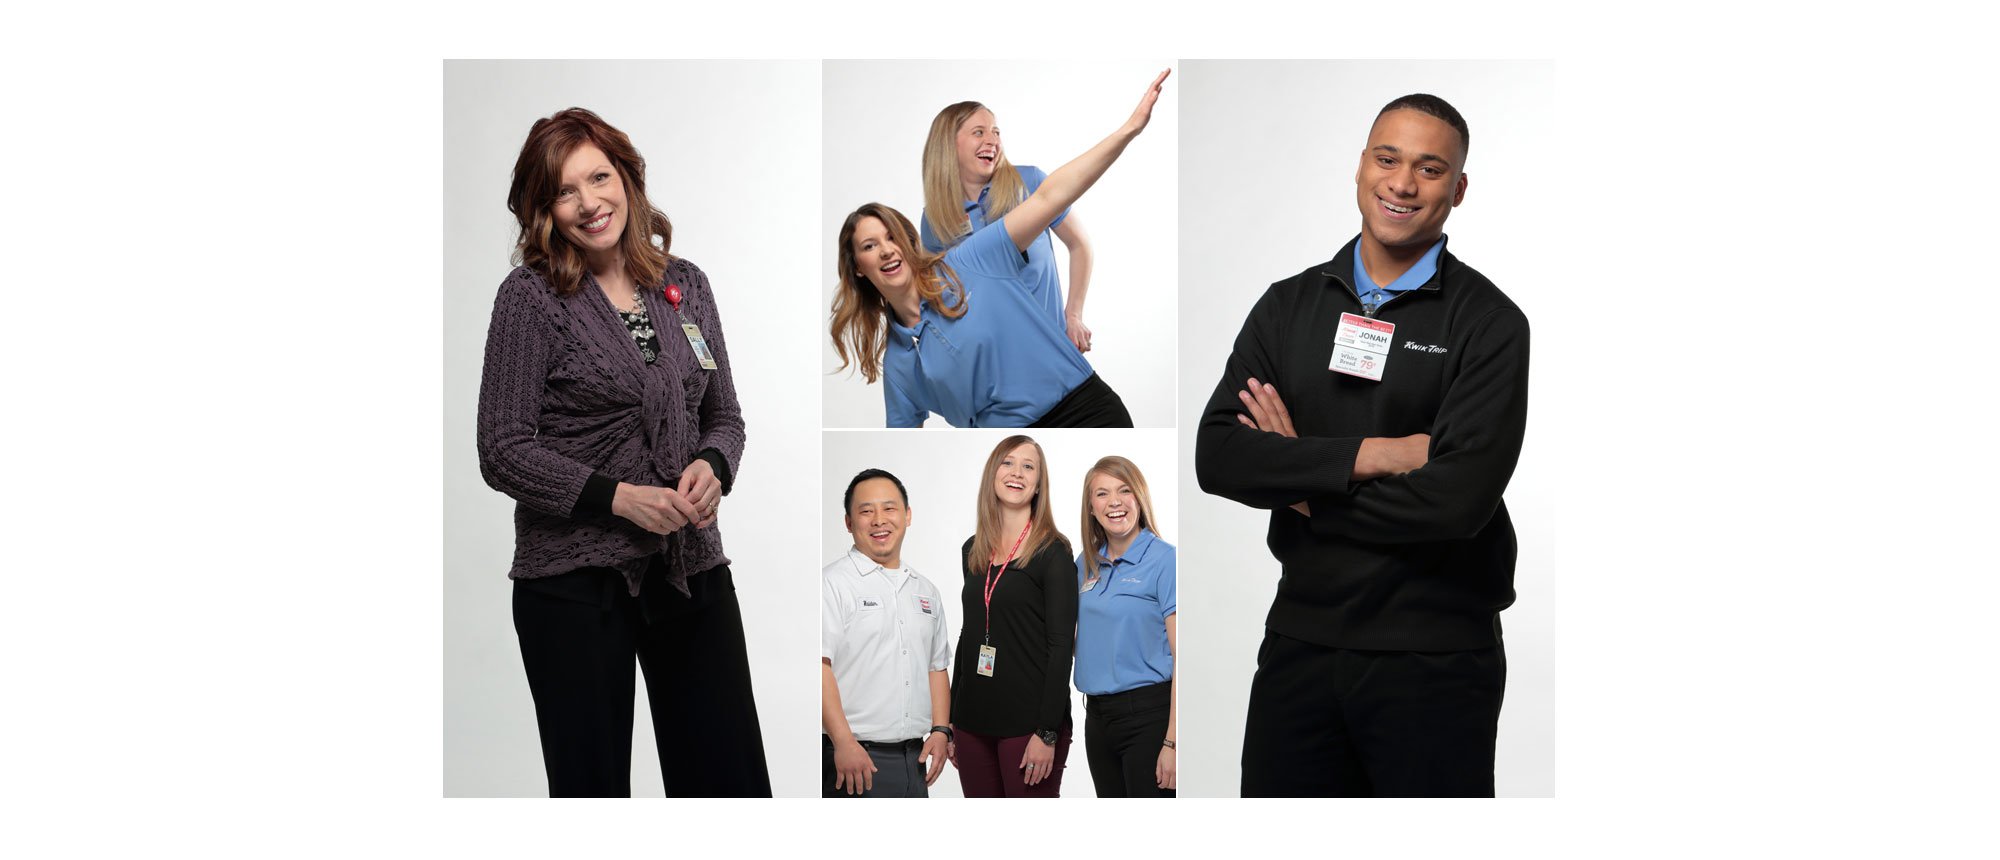 Four casual photos of diverse Kwik Trip employees smiling, having fun, and looking satisfied with their career choice.